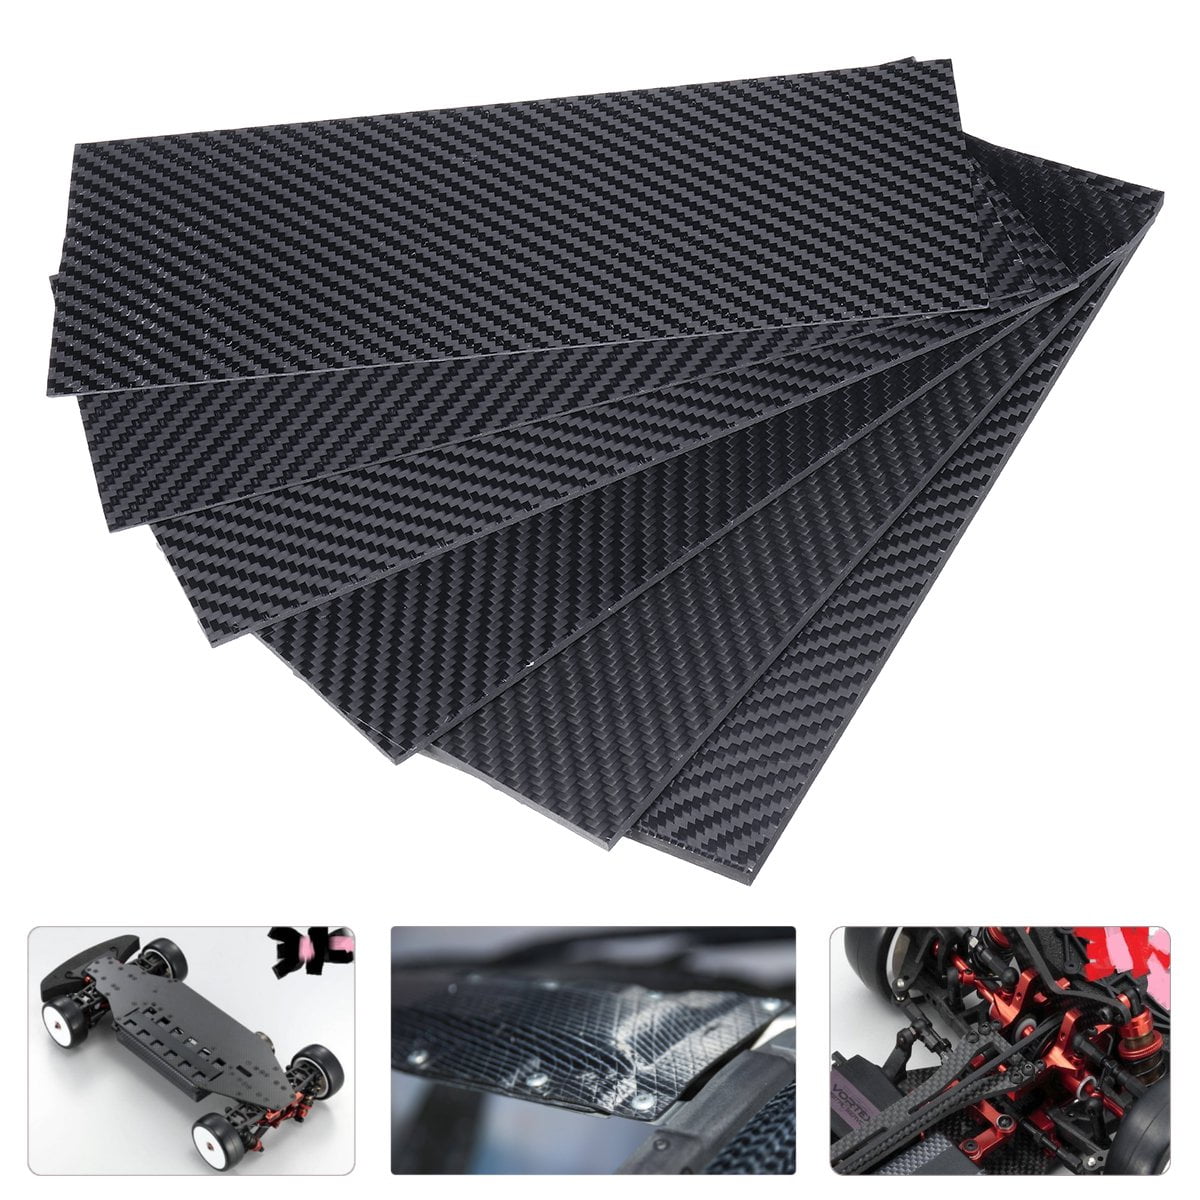 for Processed into Model Aircraft Board,200mm200mm,2mm AFexm Carbon Fiber Plate 100% Carbon Fiber Sheet 3K Plain Weave Panel Sheet,Glossy Surface 200mm 200mm 